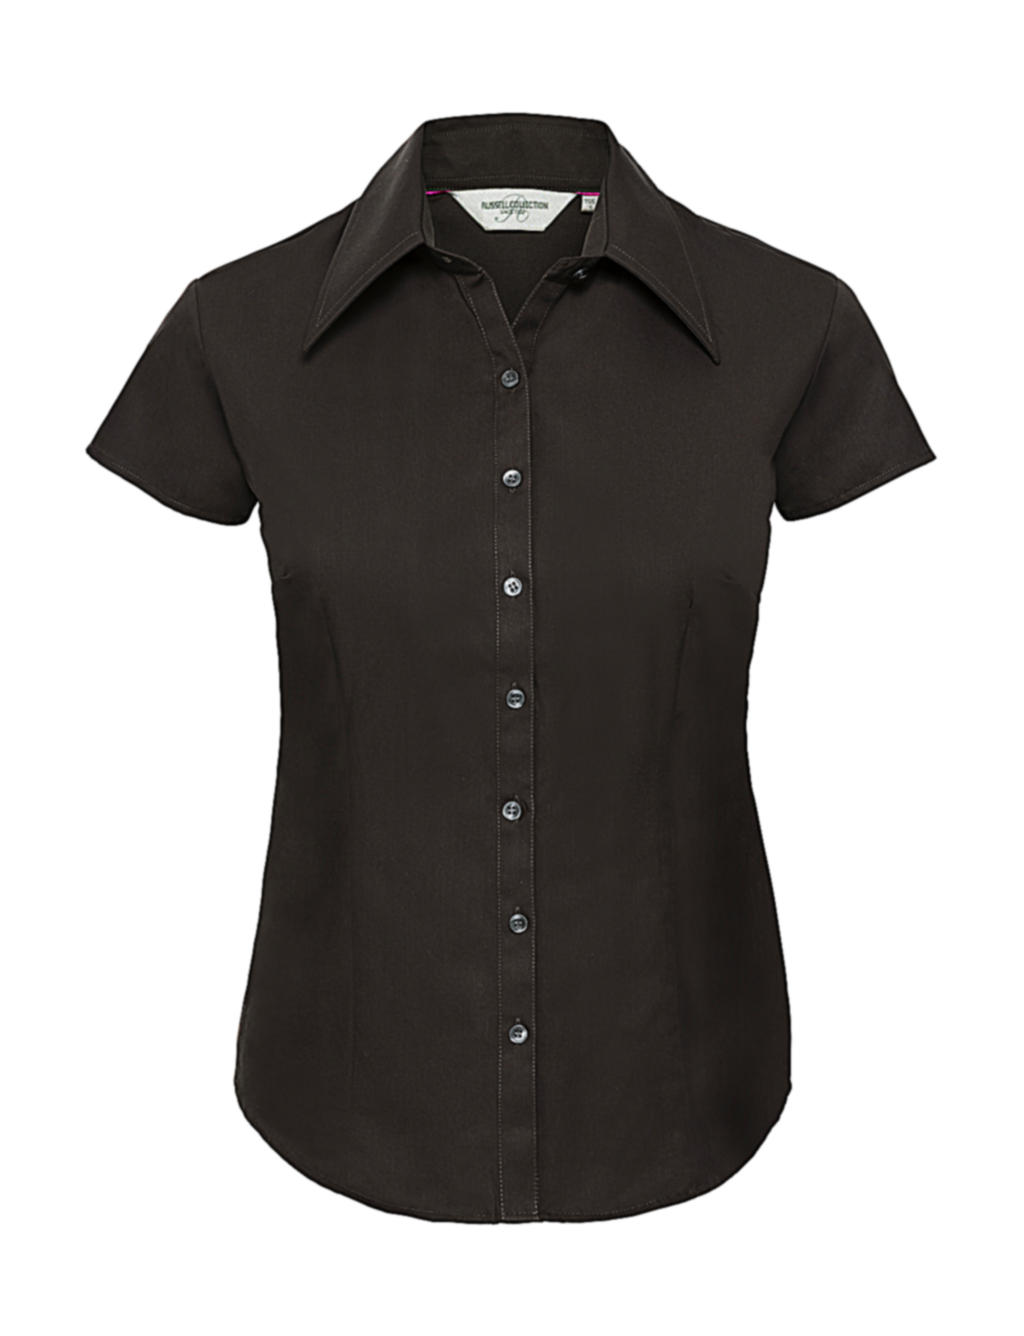  Ladies Tencel? Fitted Shirt in Farbe Chocolate